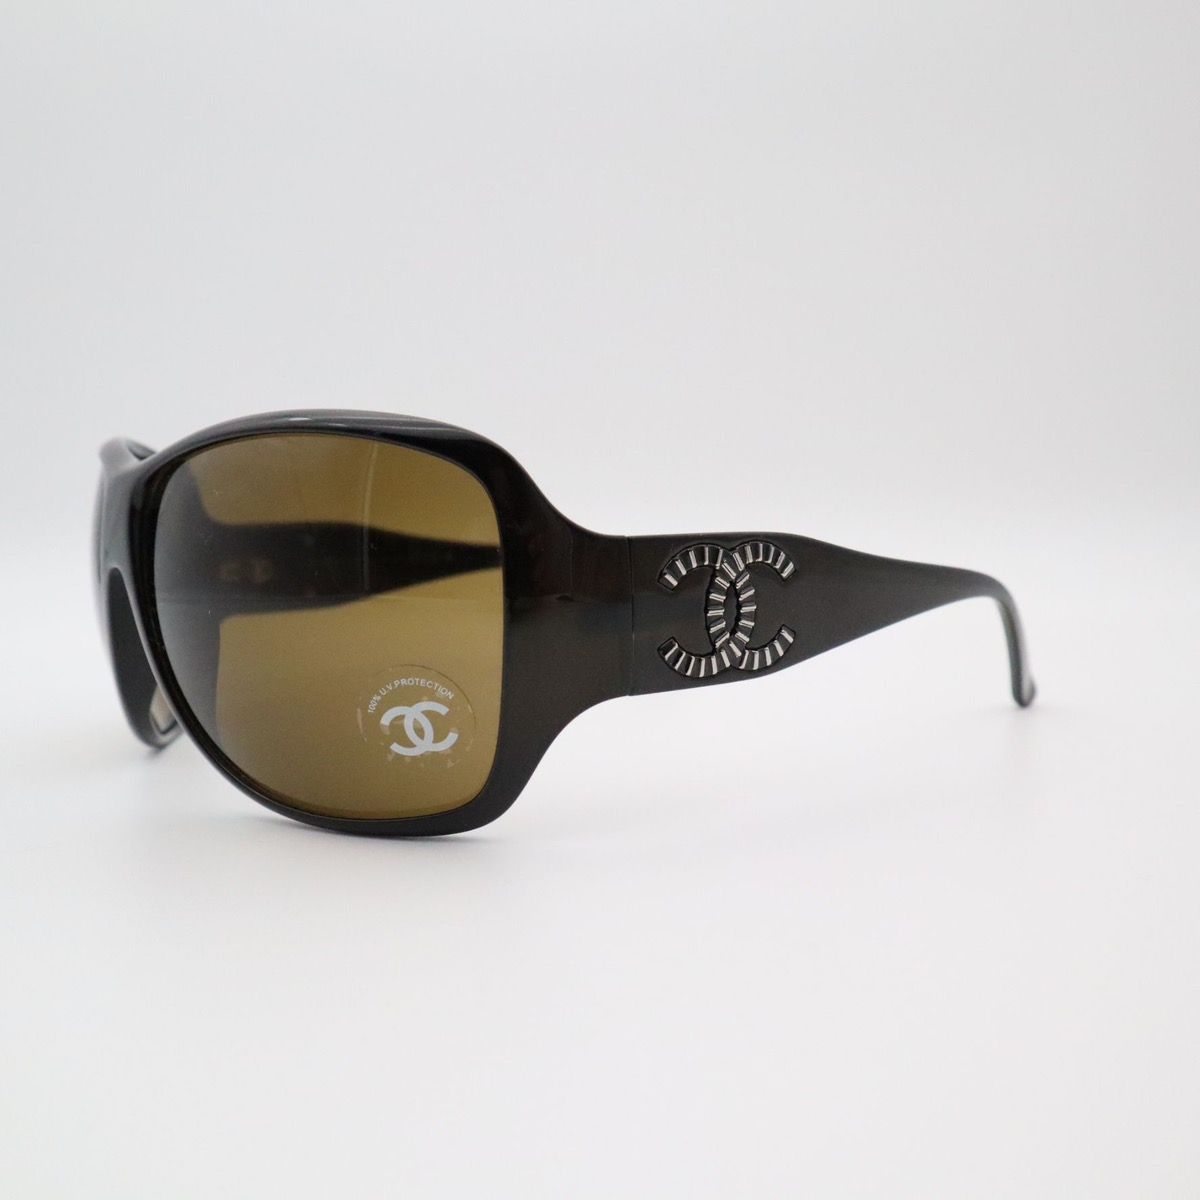 CHANEL 5086 C.830/13 Oversized Shield Mask Sunglasses Made in